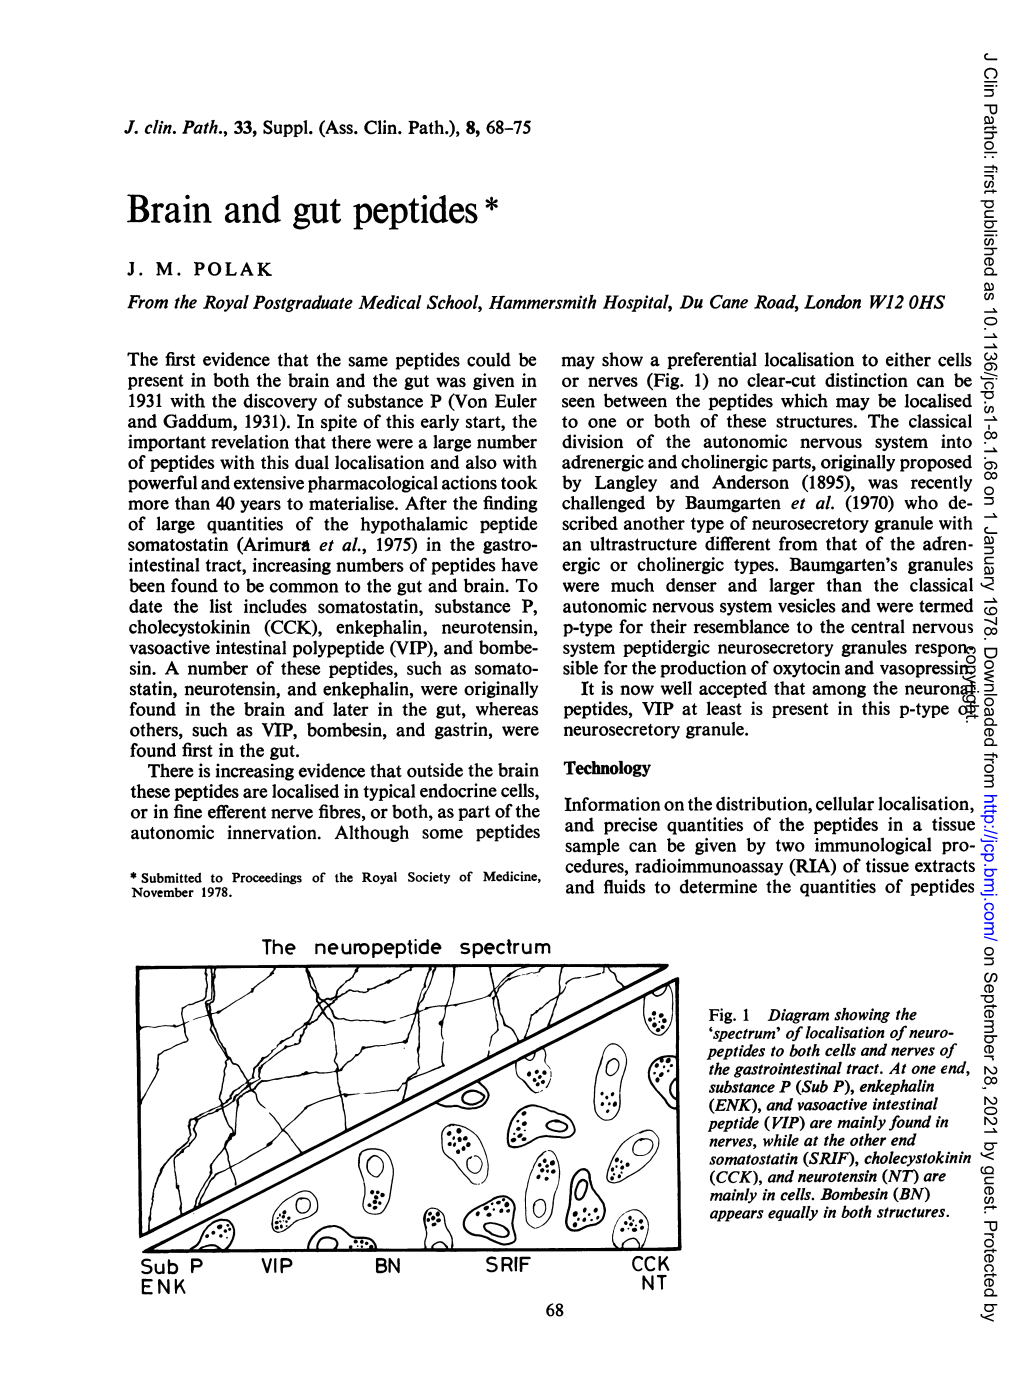 Brain and Gut Peptides*